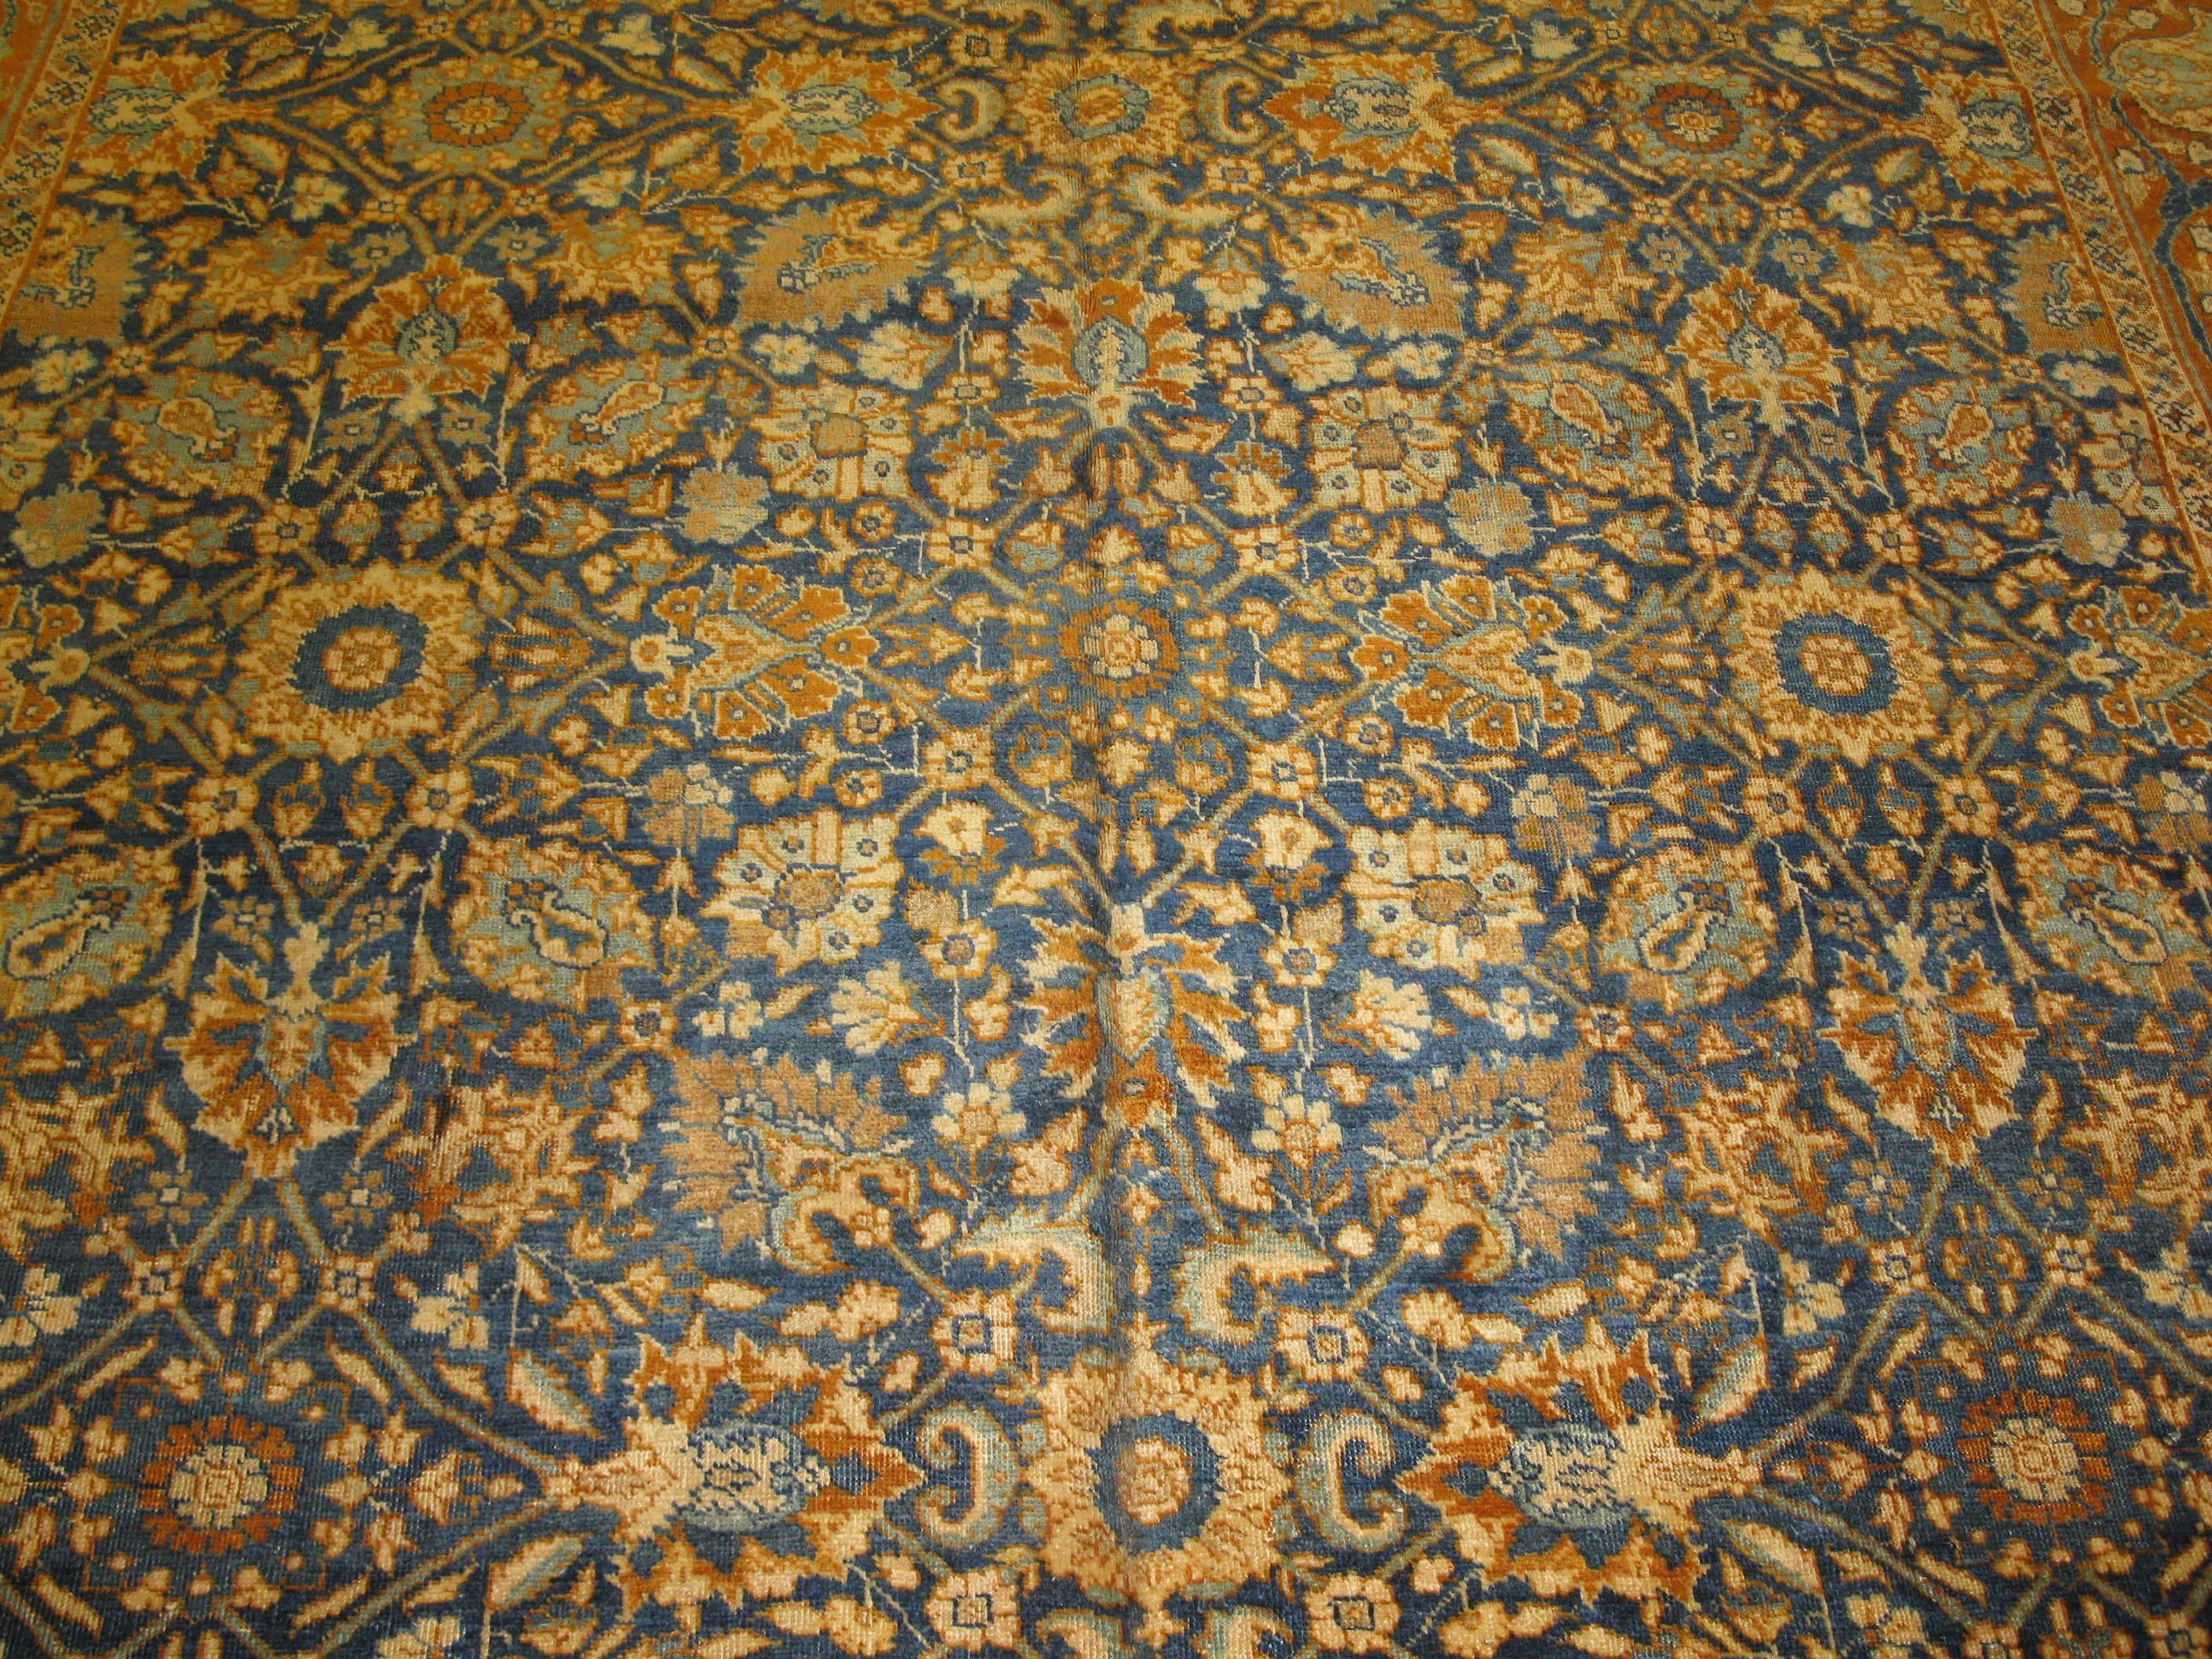 Hand-Knotted Room Size Antique Persian Tabriz Rug